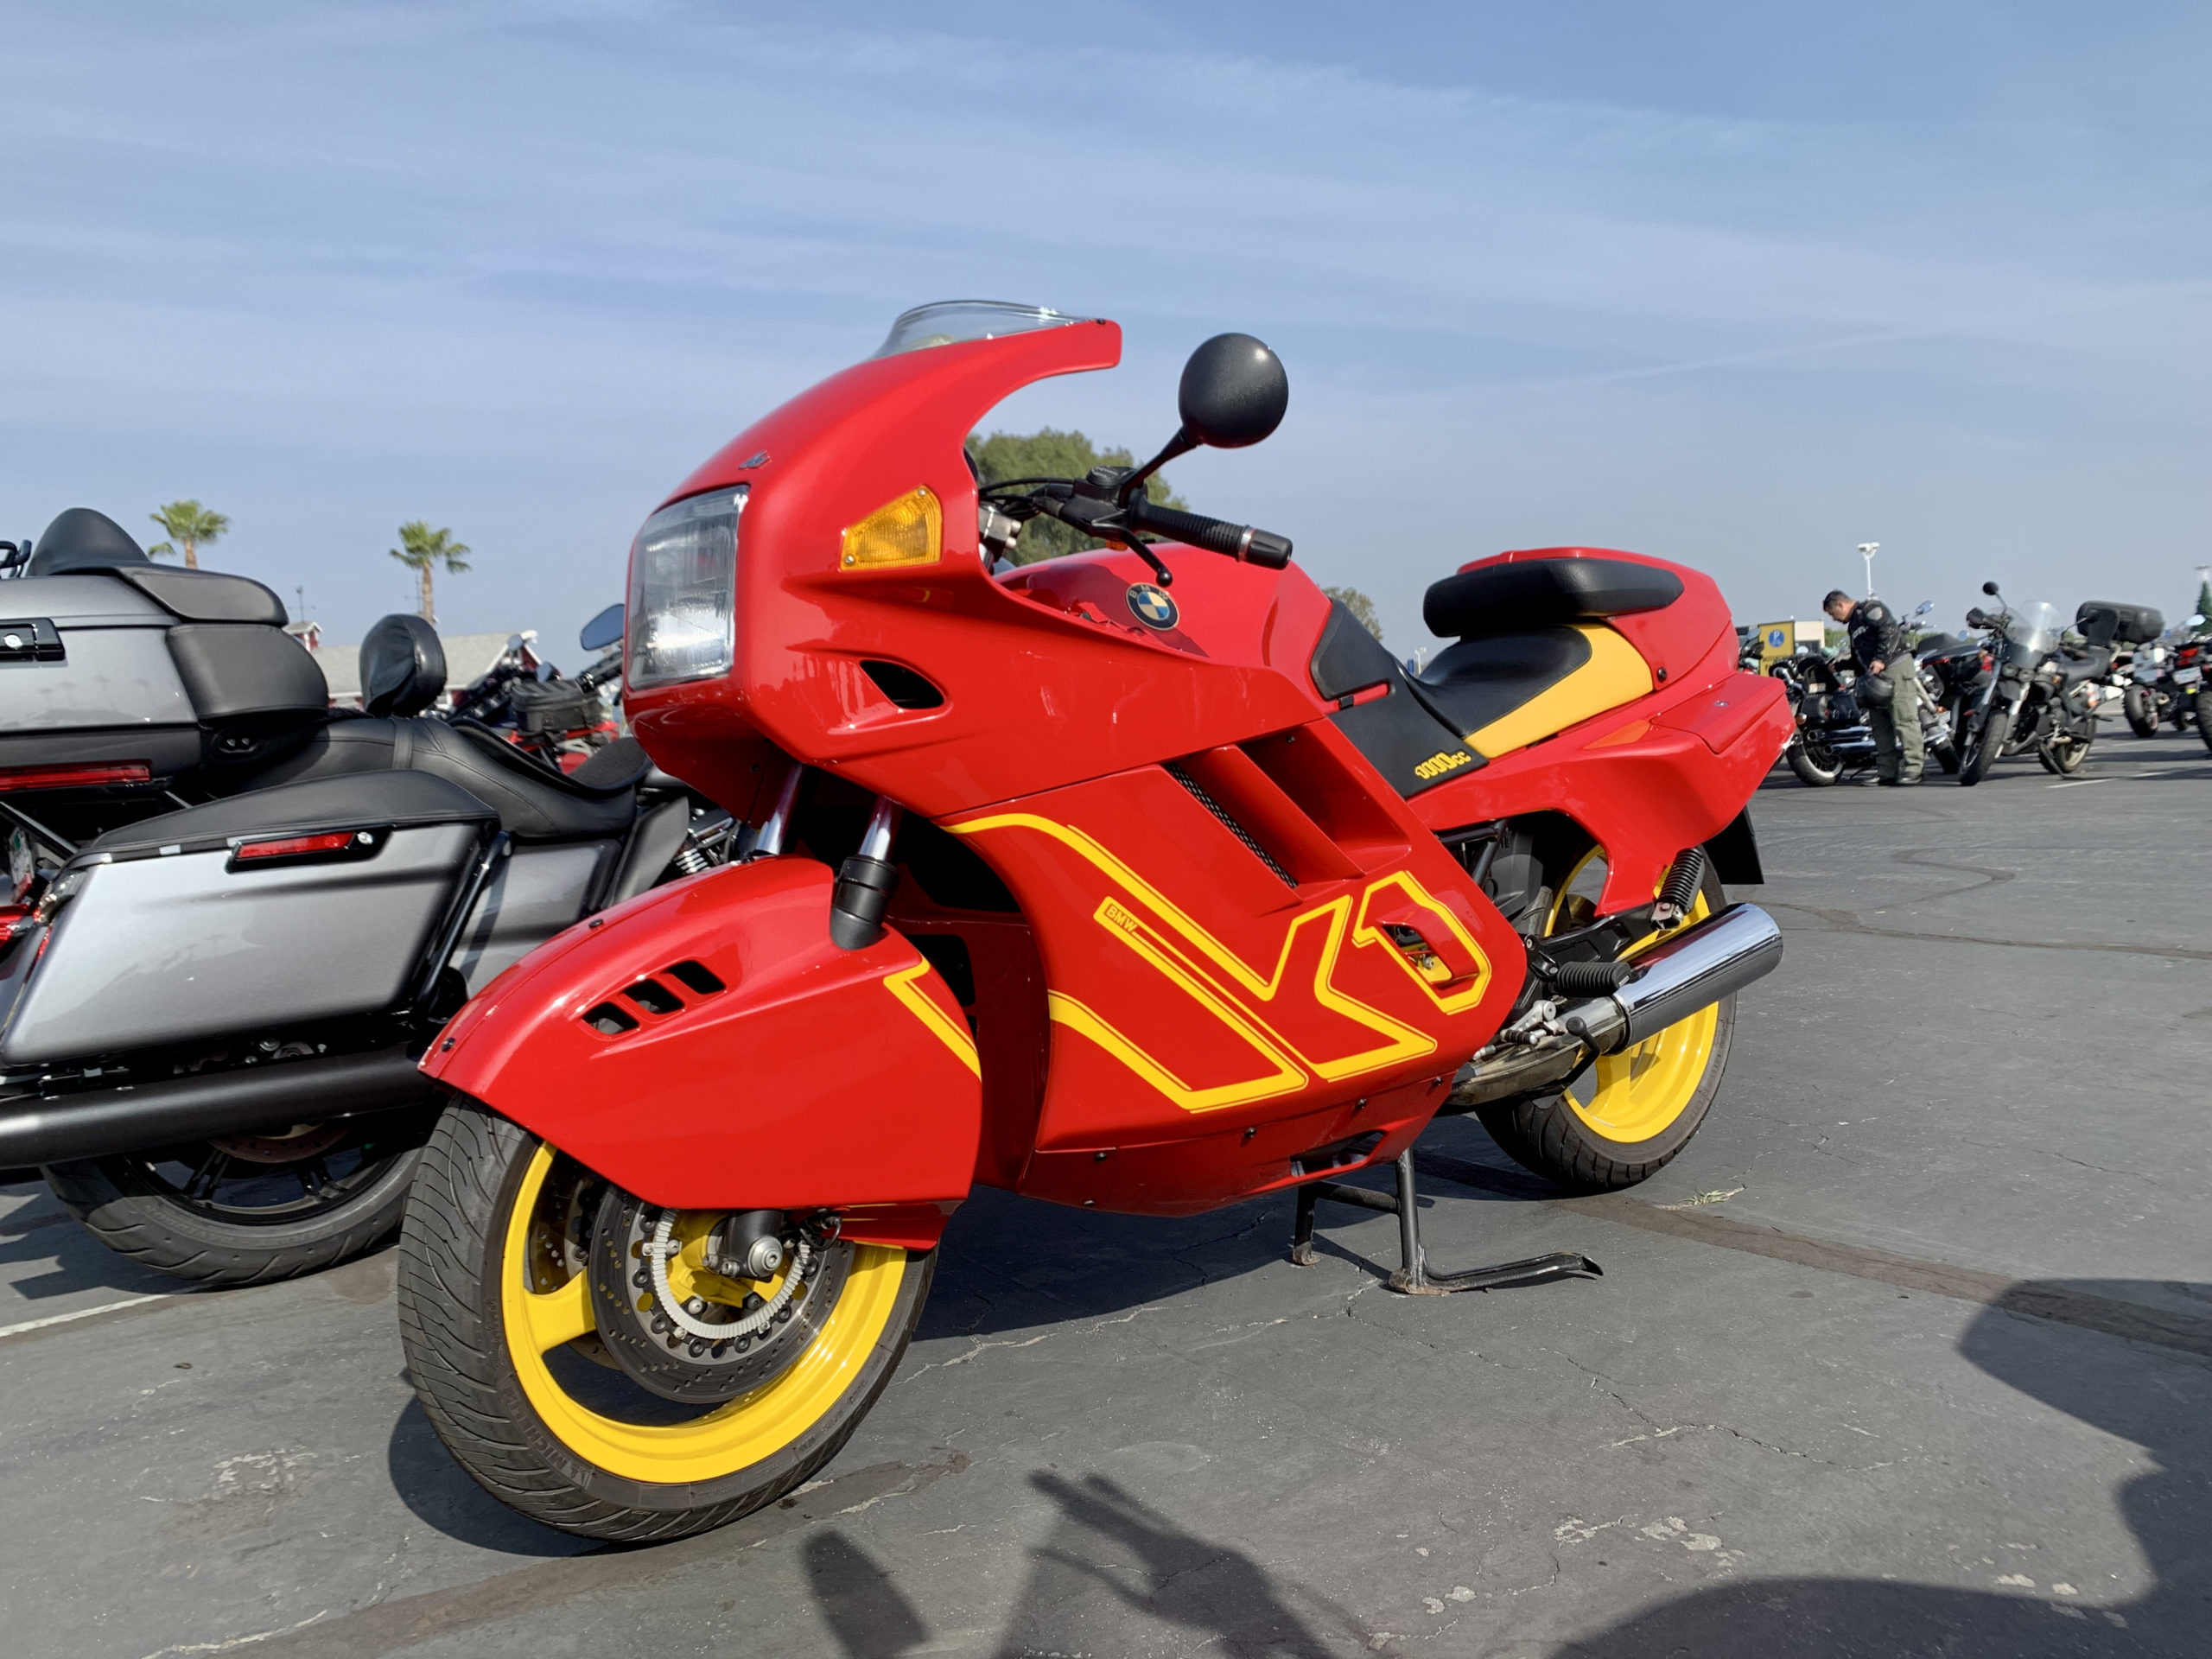 Fully faired red and yellow sport bike parked outdoors for IMS 2021